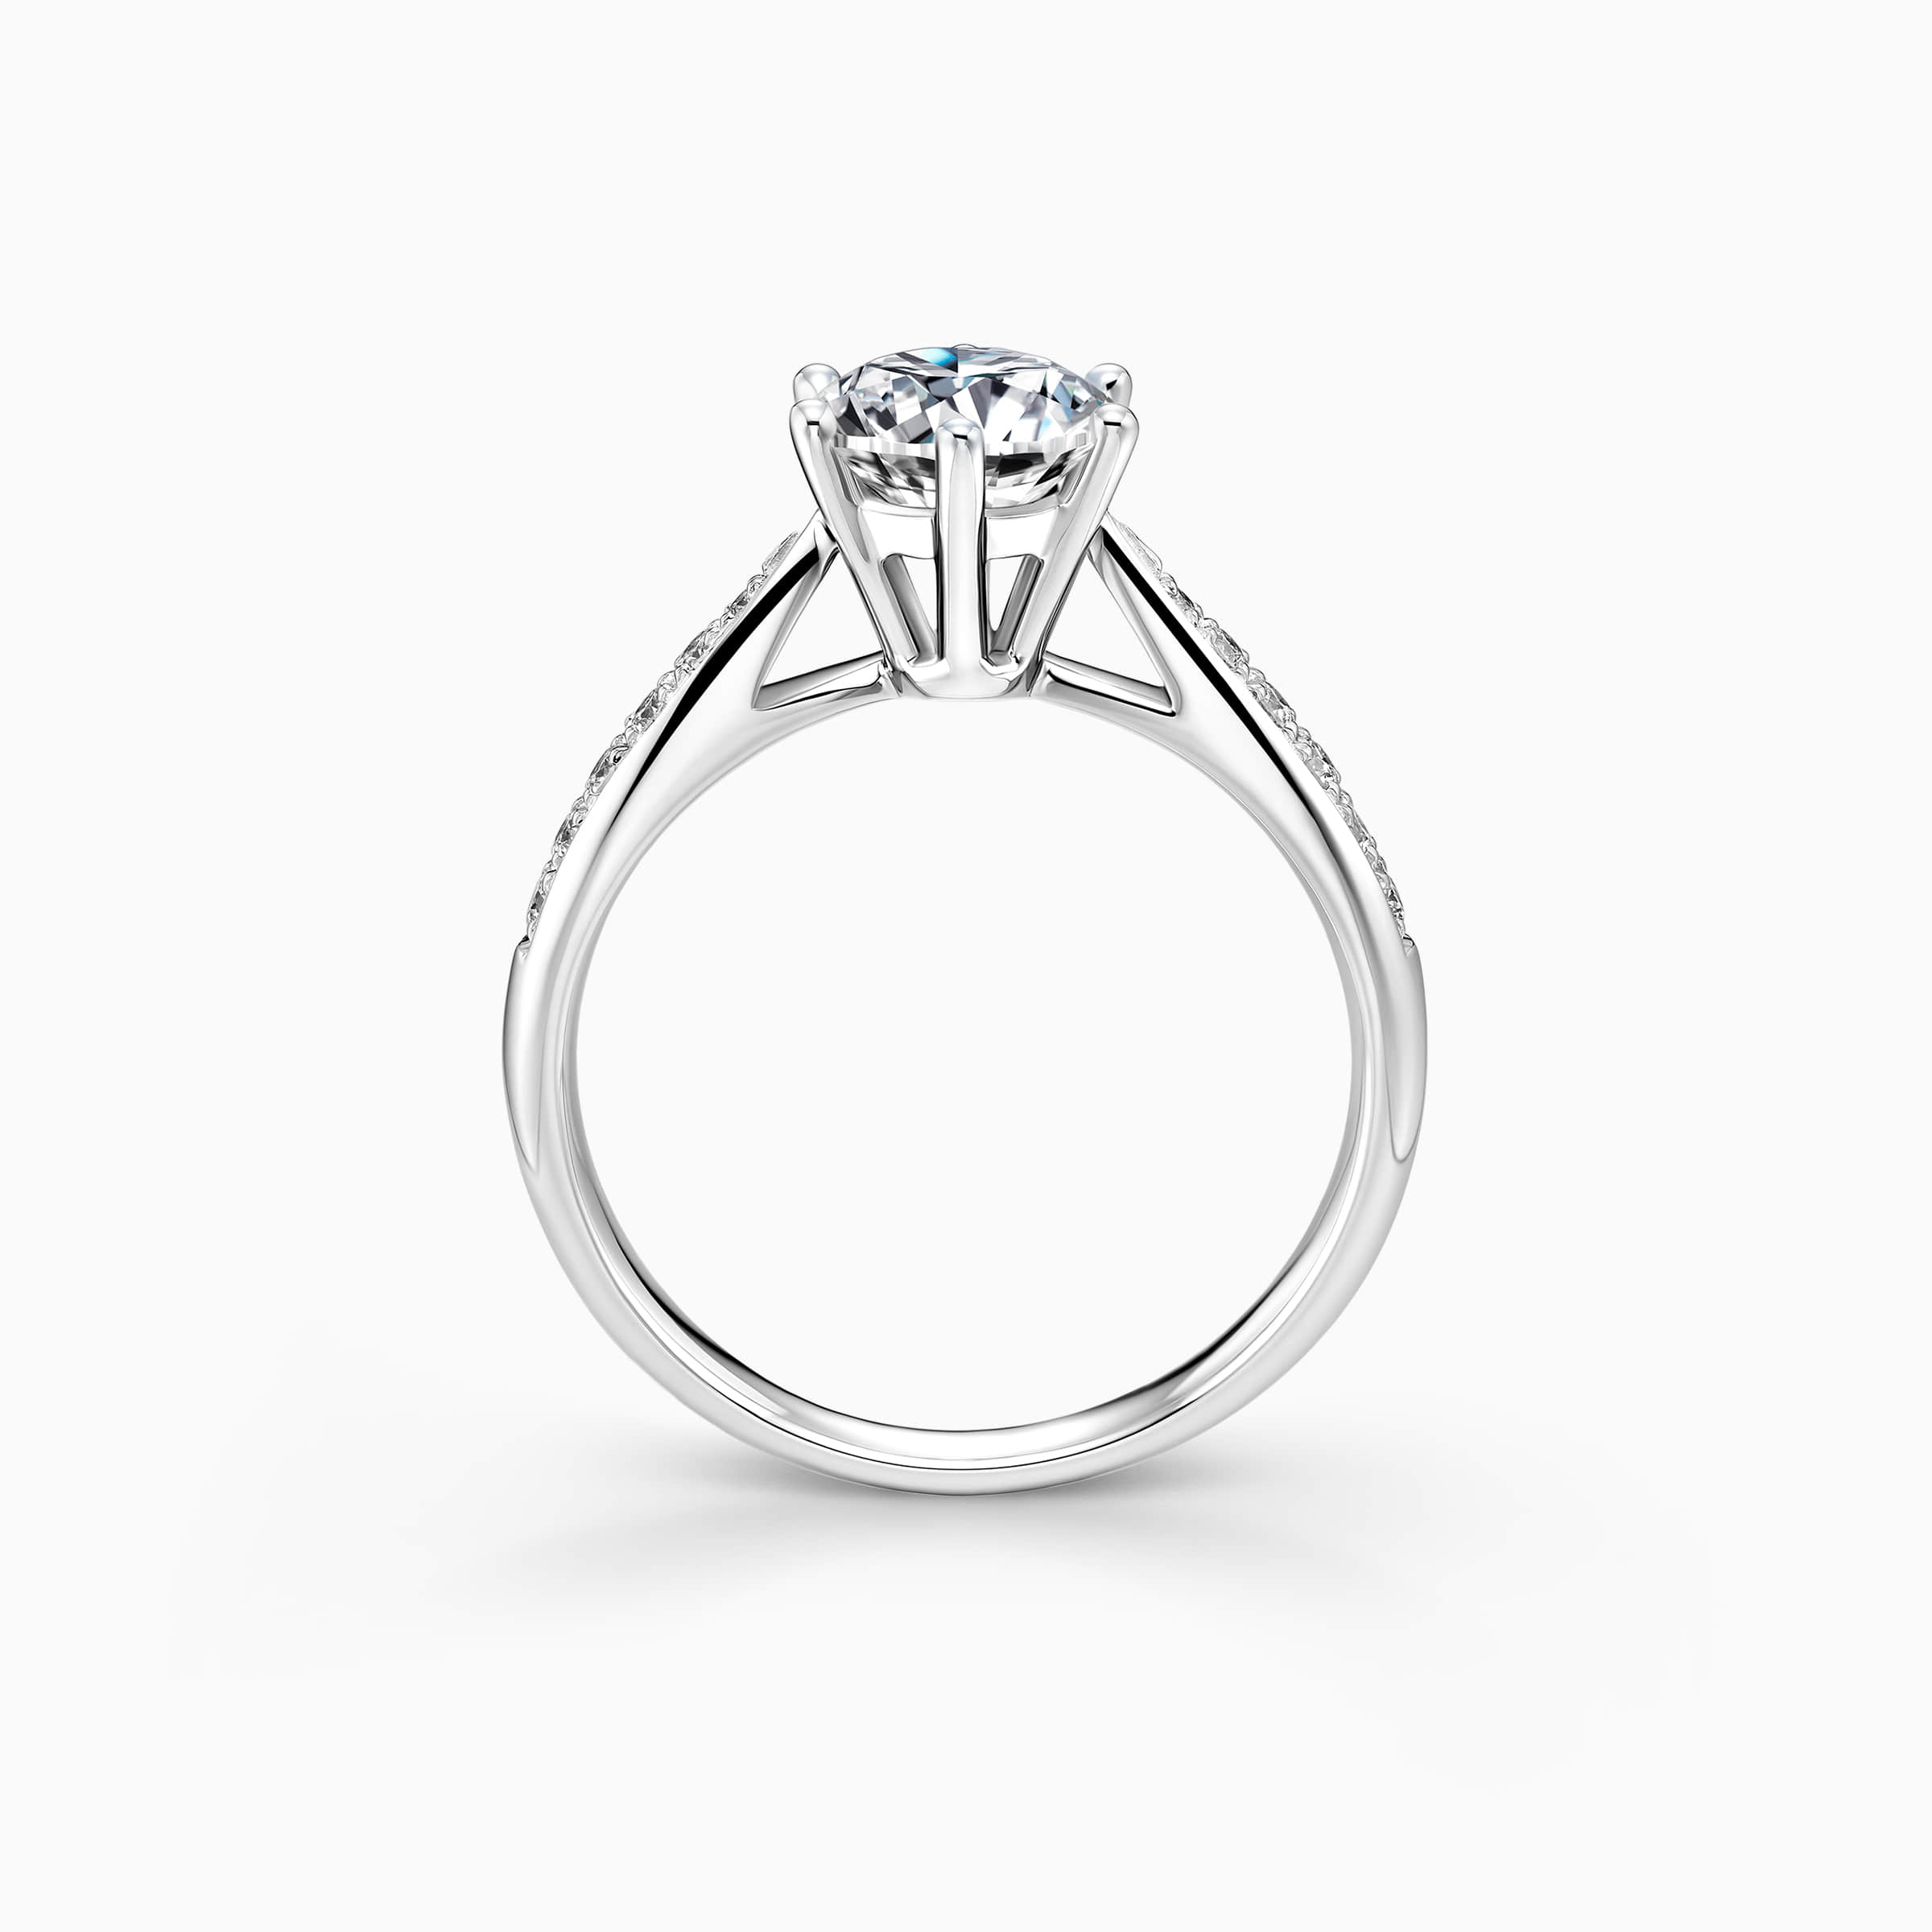 darry ring 6 prong engagement ring side view